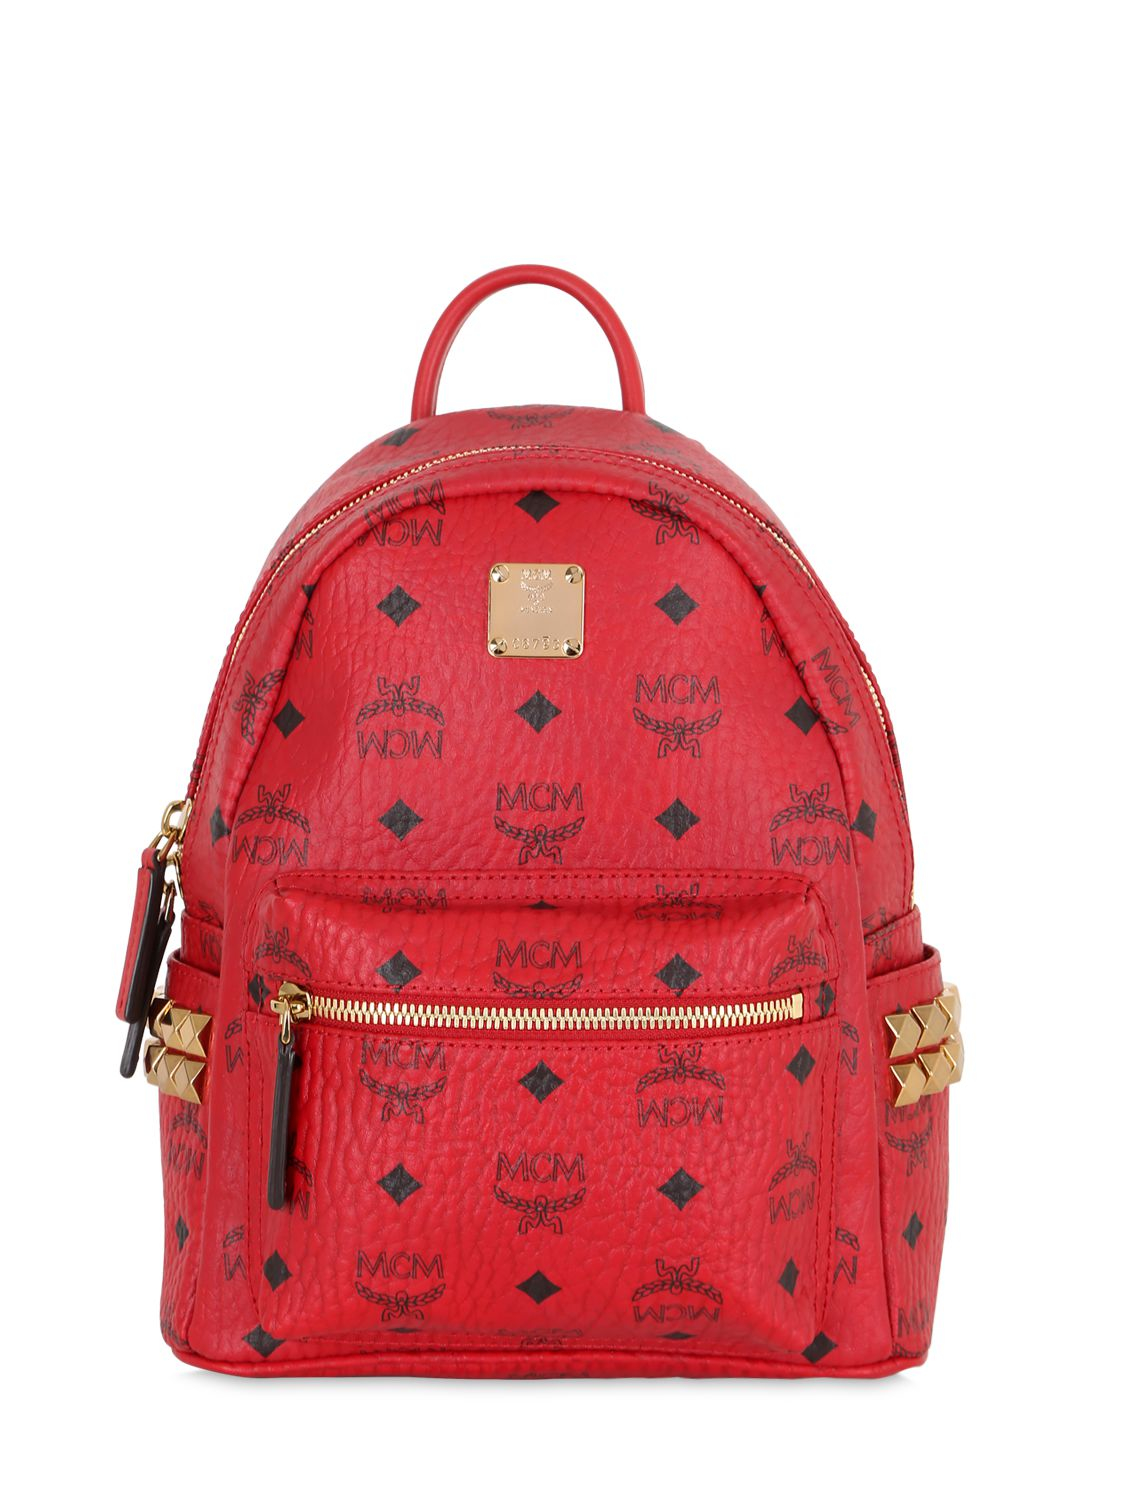 Red Mcm Backpack | IUCN Water